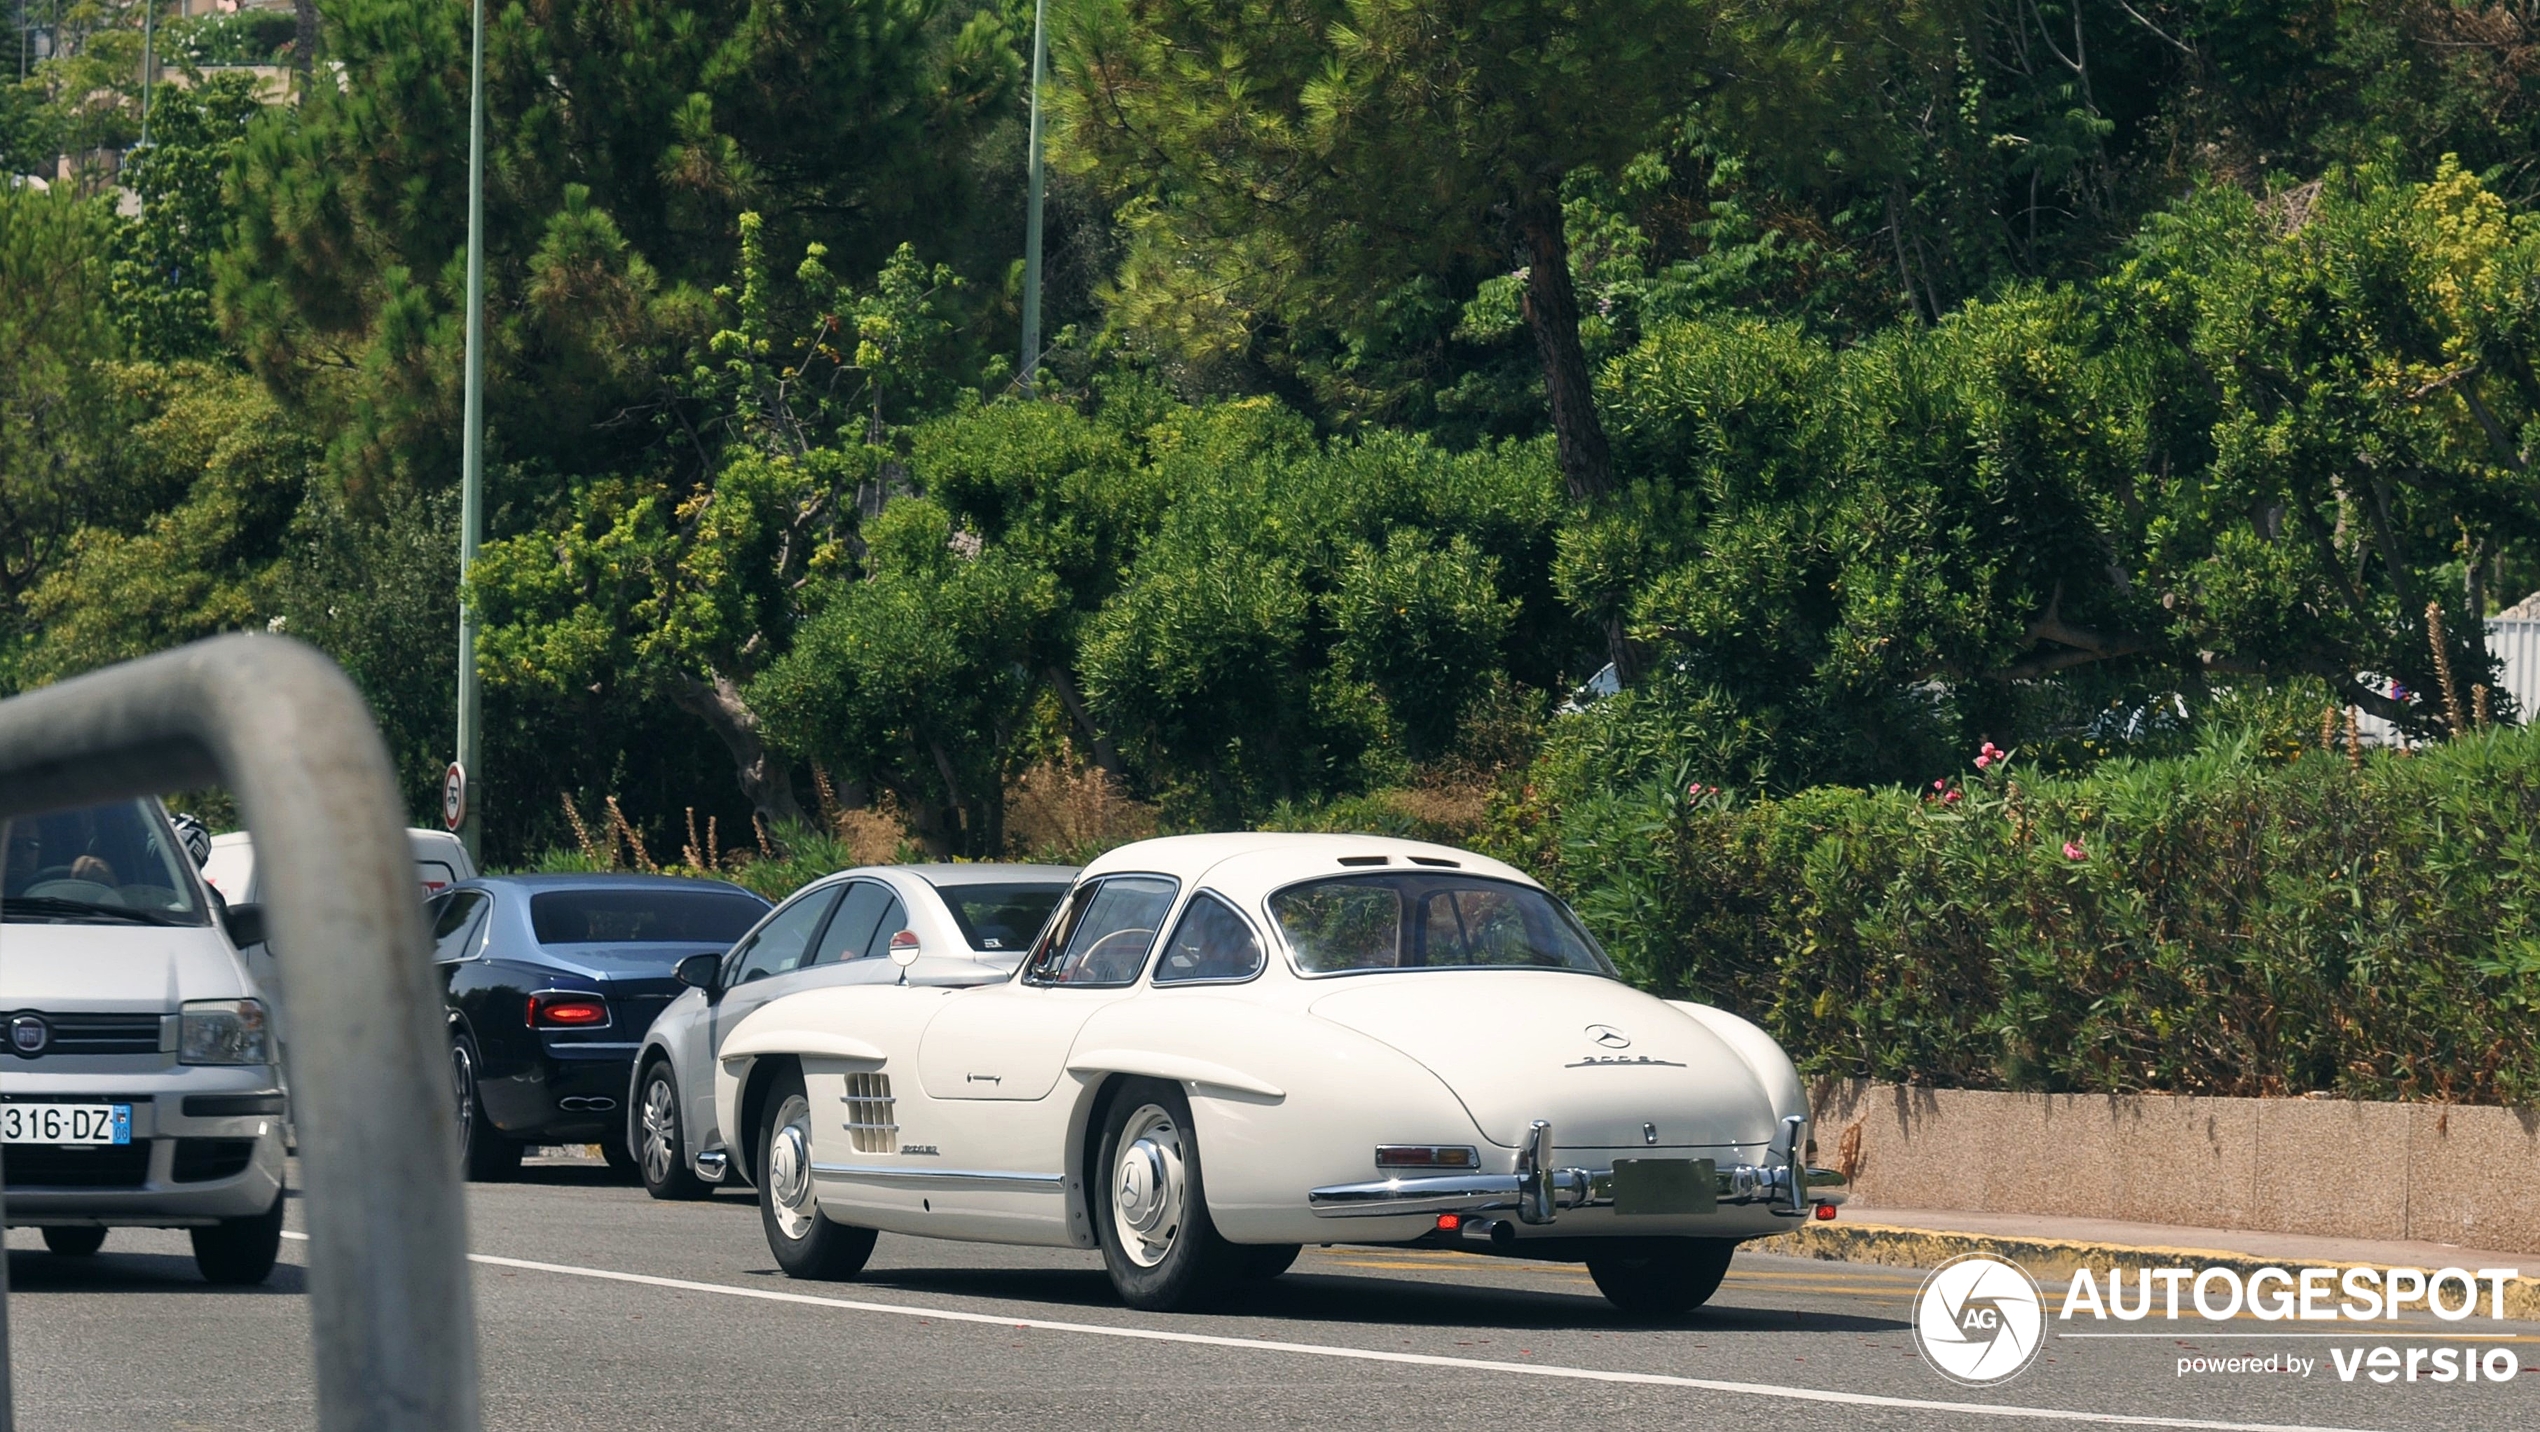 The legendary 300 SL emerges in the South of France.